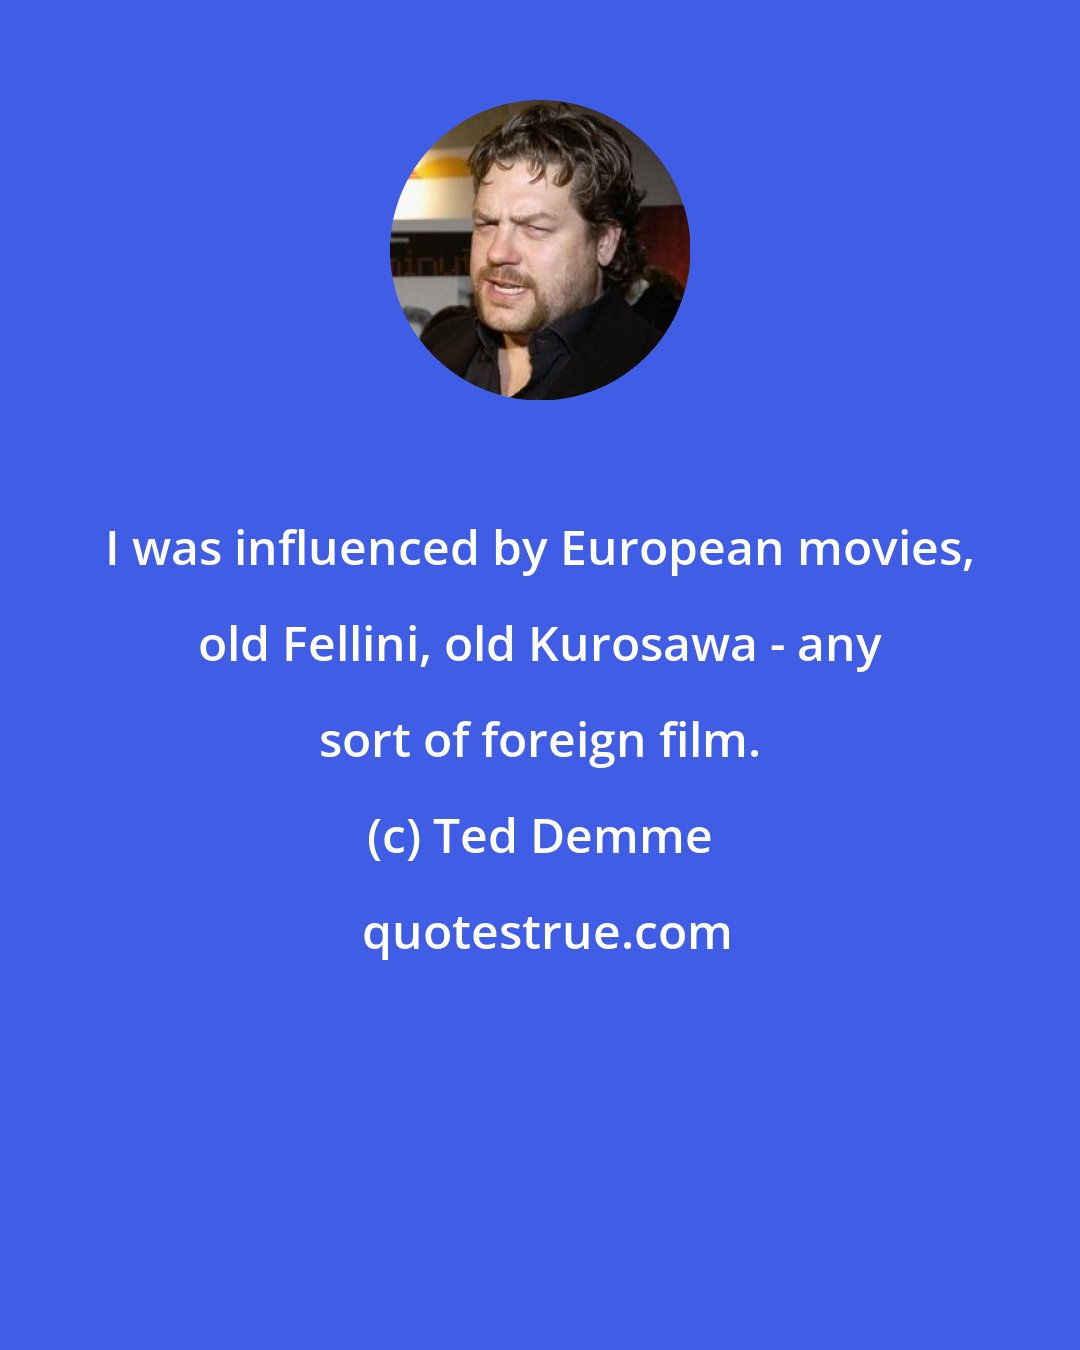 Ted Demme: I was influenced by European movies, old Fellini, old Kurosawa - any sort of foreign film.